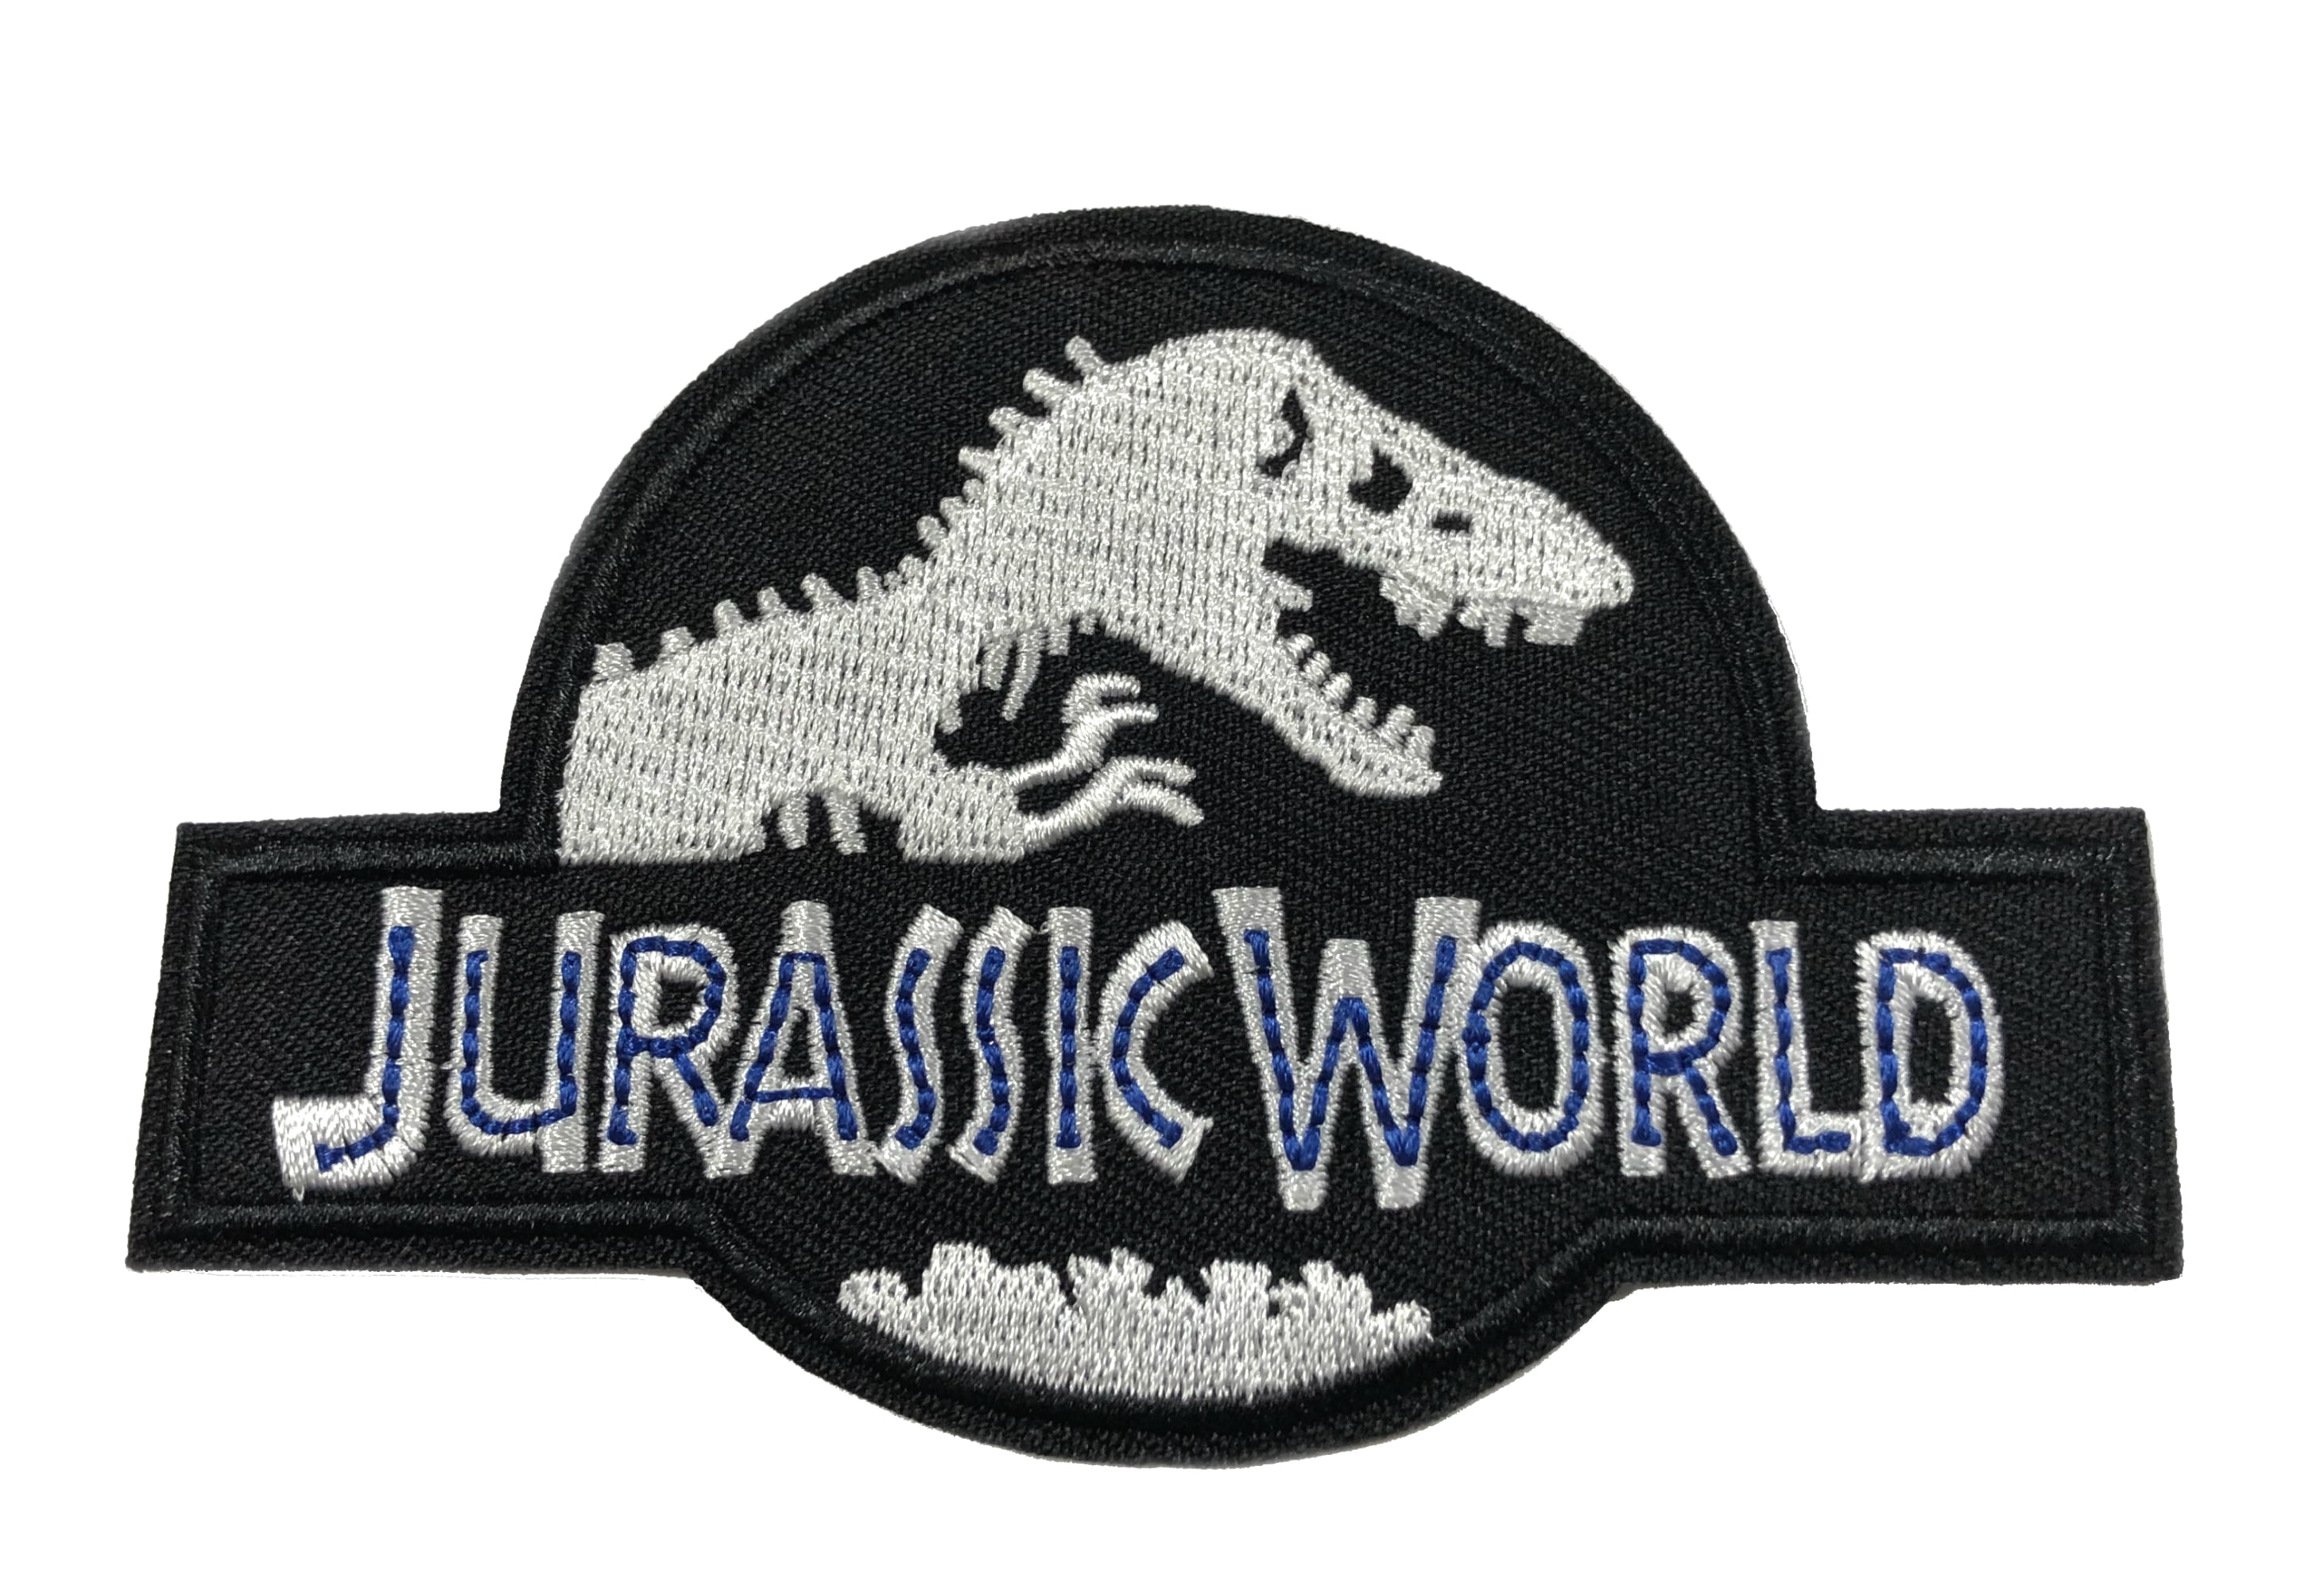 Jurassic Park Movie Video Game Embroidered Iron On Sew On Patch Badge 